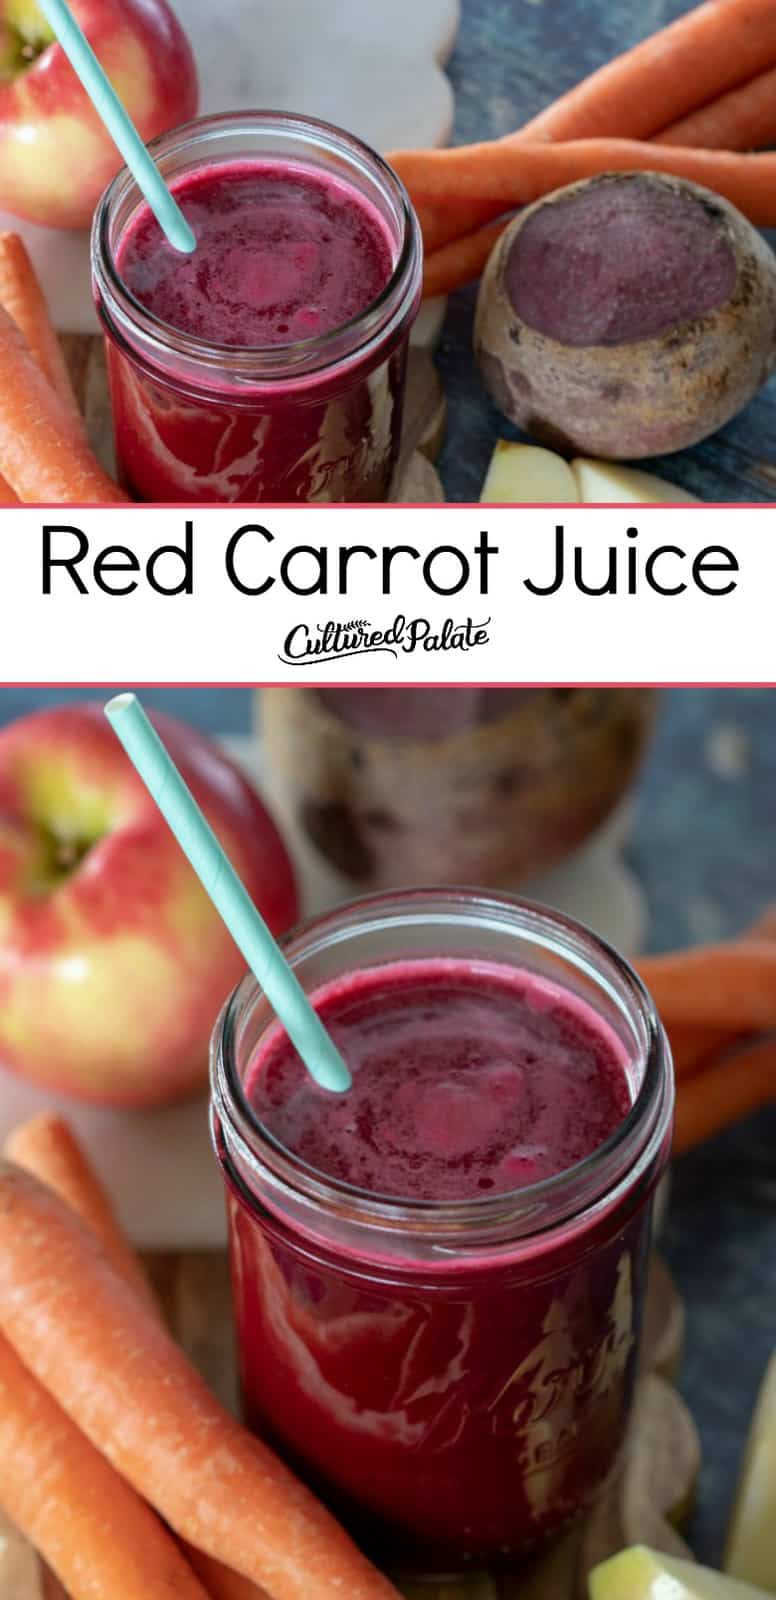 Red Carrot Juice shown in glass jar in two images and text overlay.